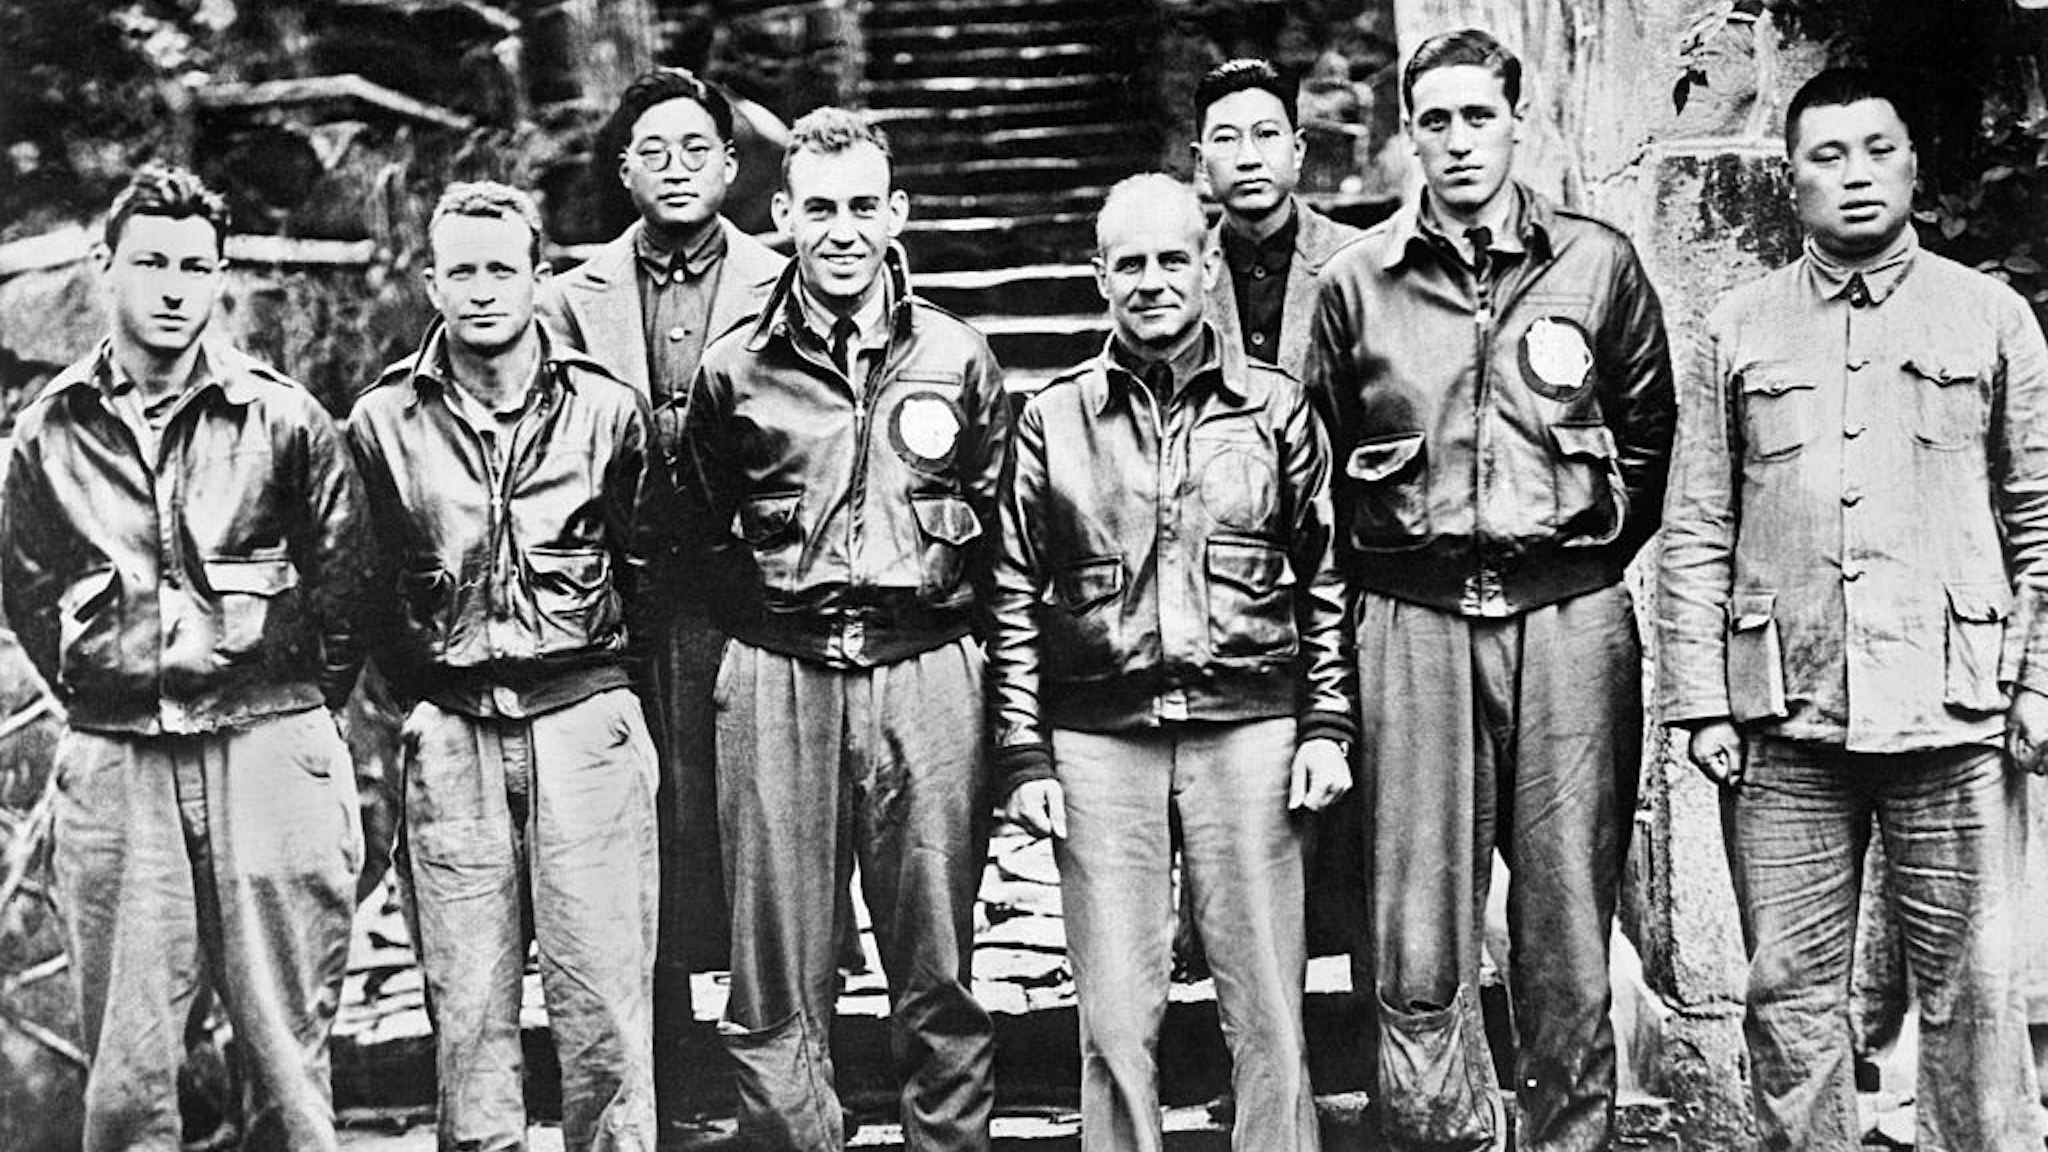 Major General Jimmy Doolittle and his crew after they led the first bombing raid on Tokyo during WWII, China, April 22, 1943. The Raiders took off in sixteen B-25s from the USS Hornet aircraft carrier and then bailed out over China after bombing Tokyo. Pictured from left are: Staff Sgt FA Braemer, Bombardier; Staff Sgt PJ Leonard, Engineer-Gunner; Kt RE Cole, Co-Pilot; General Doolittle; and Lt HA Potter, Navigator. (Photo by Underwood Archives/Getty Images)